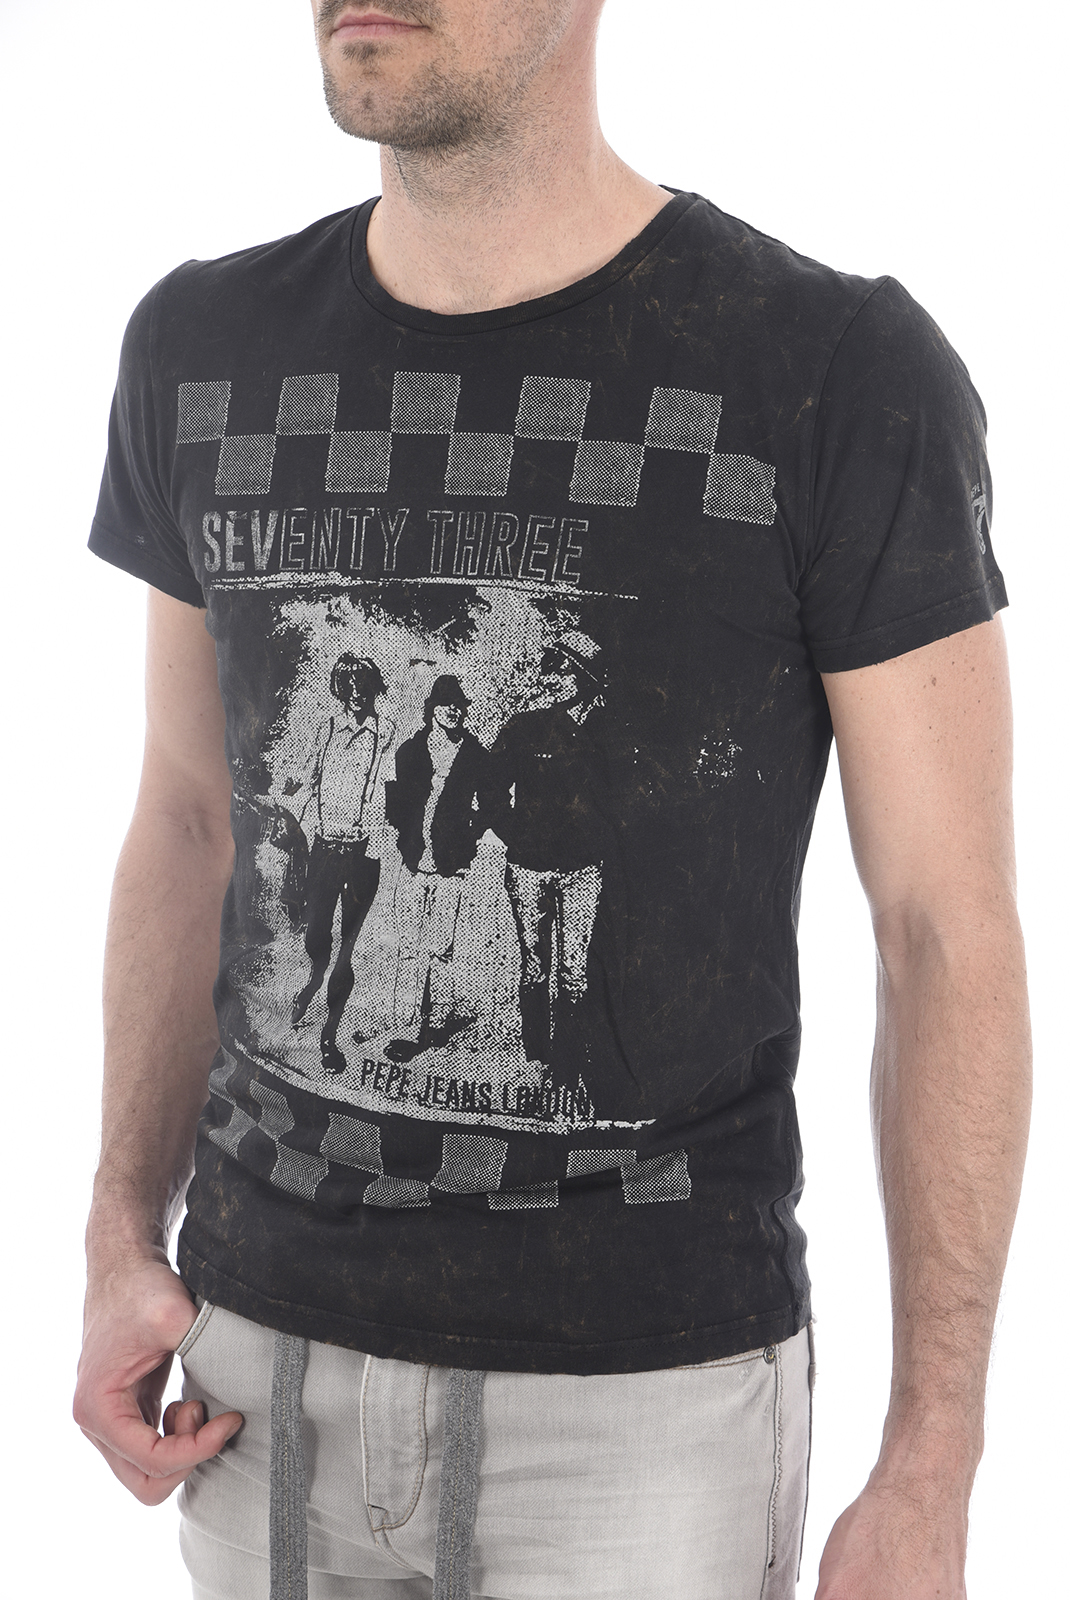 Tee-shirt noir vintage rider stretch homme - Pepe Jeans 